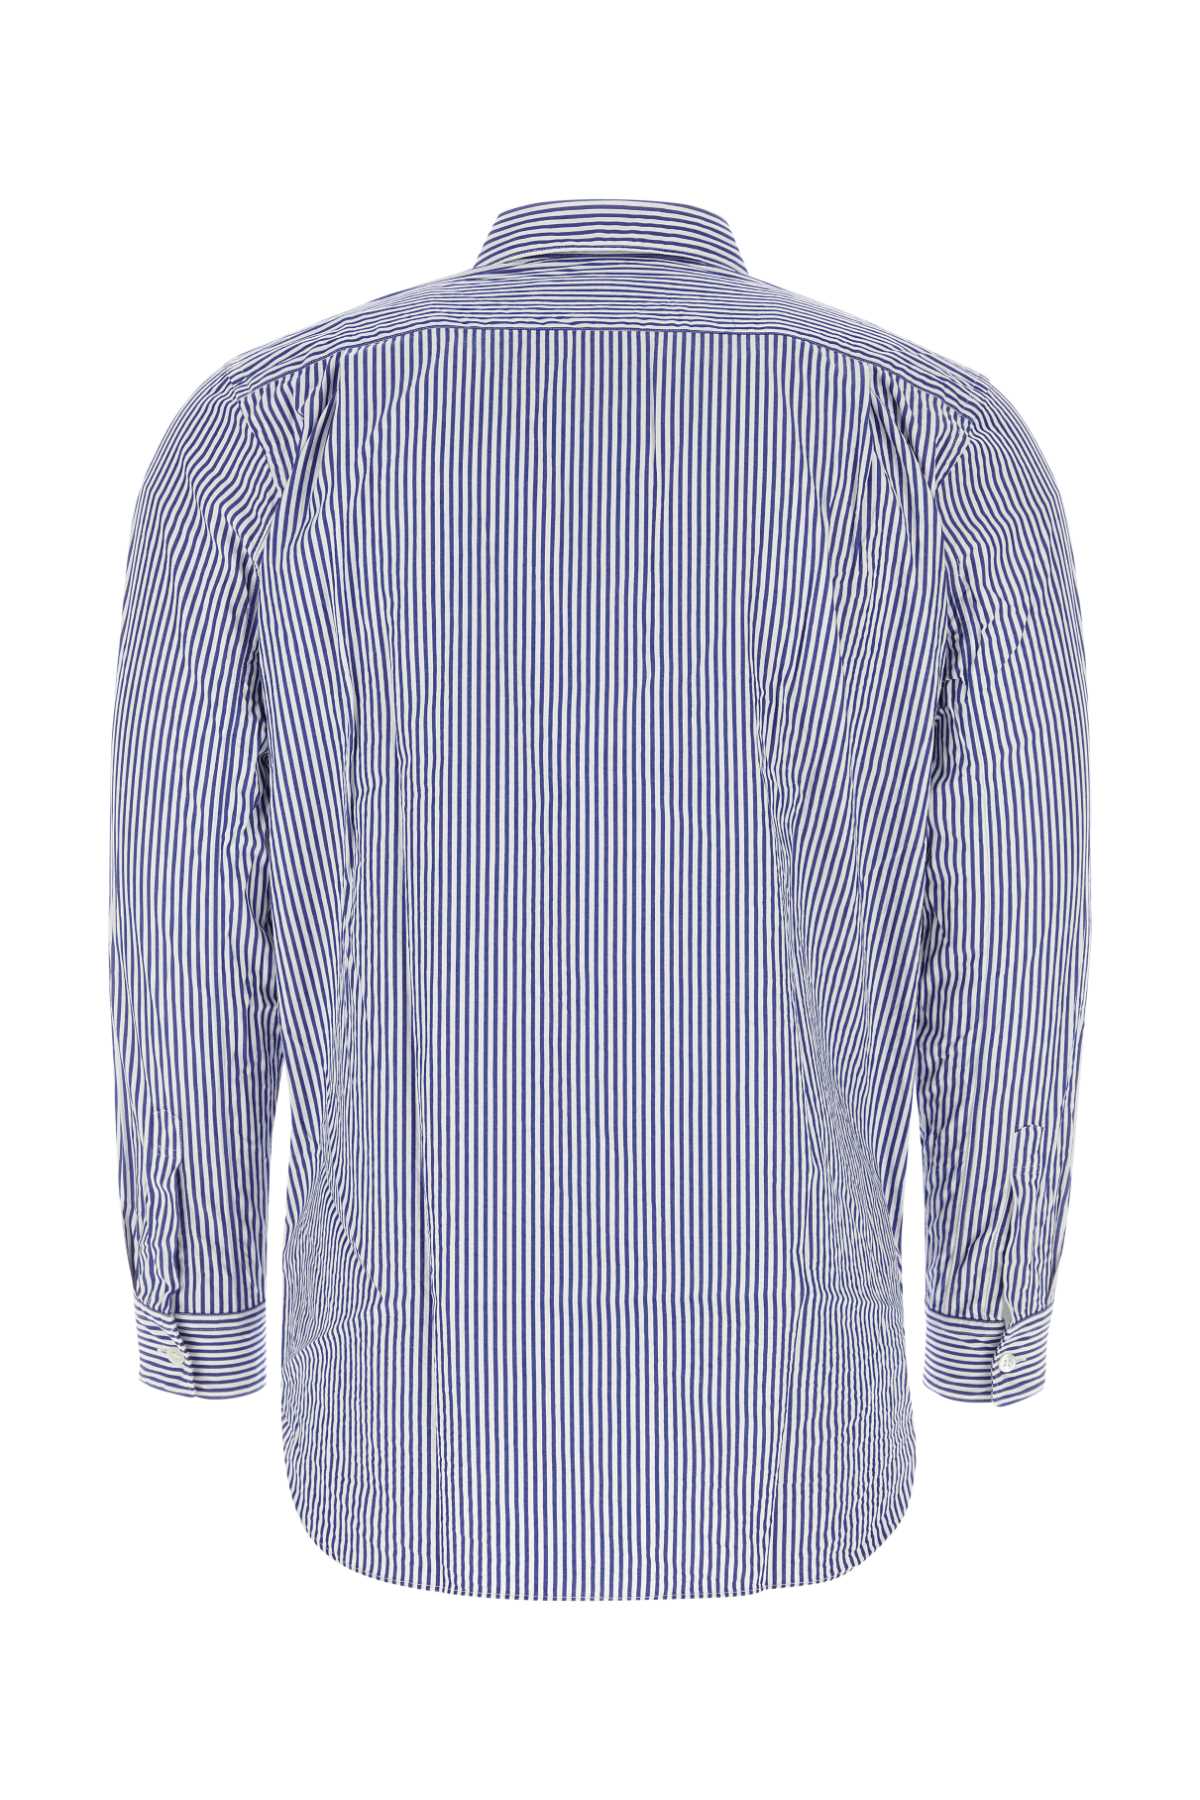 Comme Des Garçons Play Embroidered Cotton Shirt In Bluewhtstripes